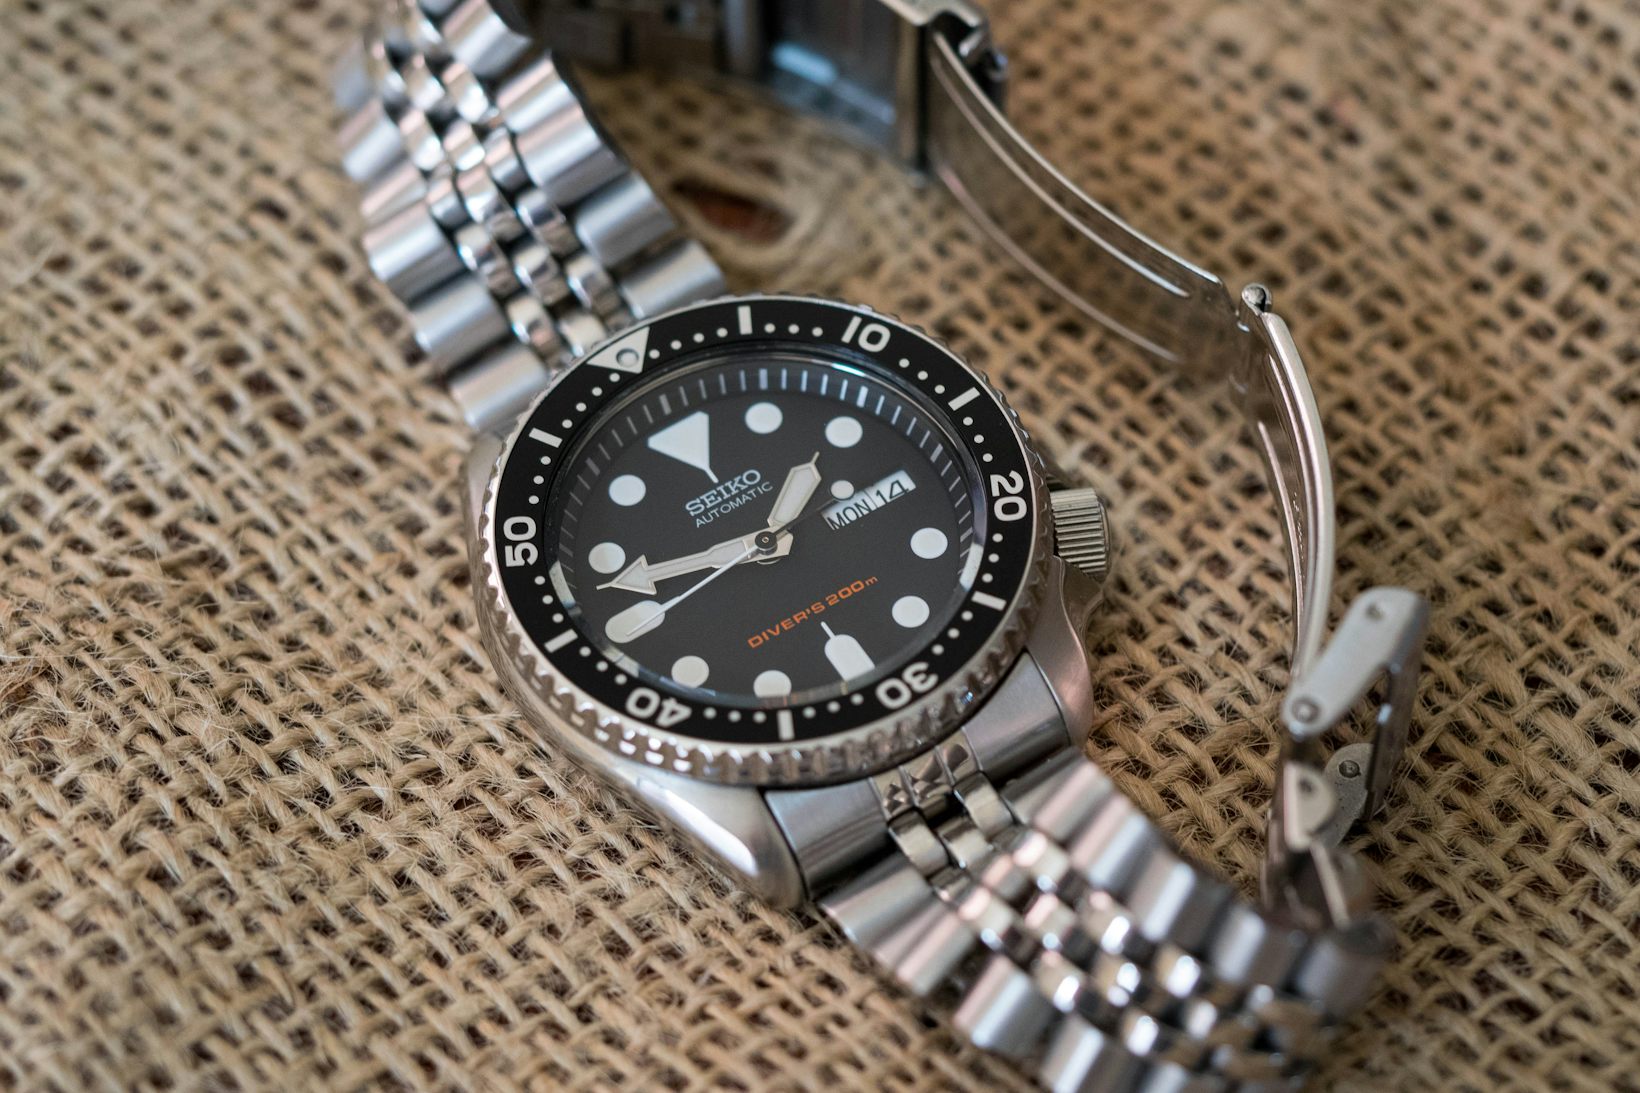 The SKX007 King value-packed watches